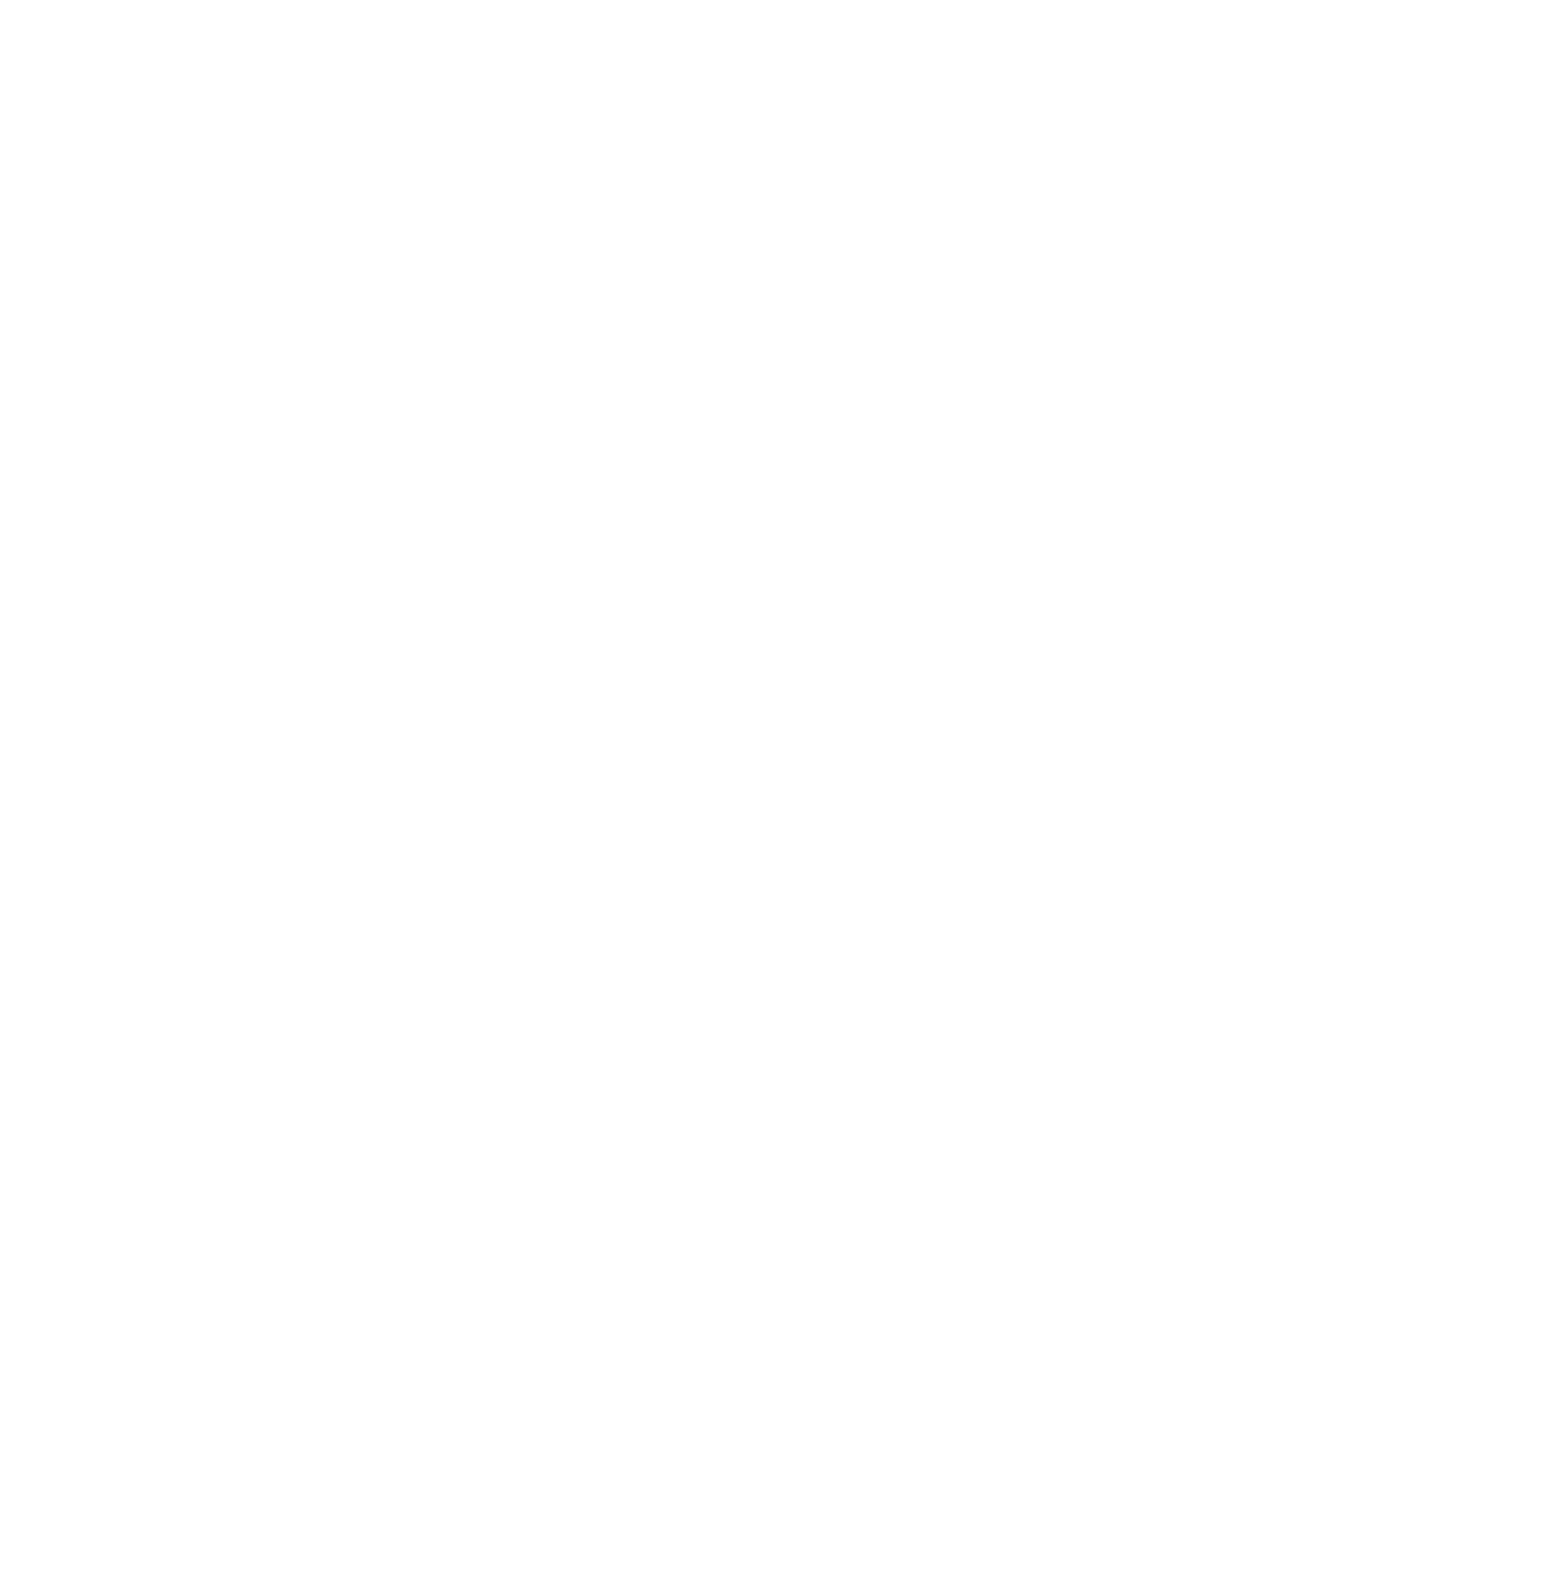 Hexatronic Group AB logo for dark backgrounds (transparent PNG)